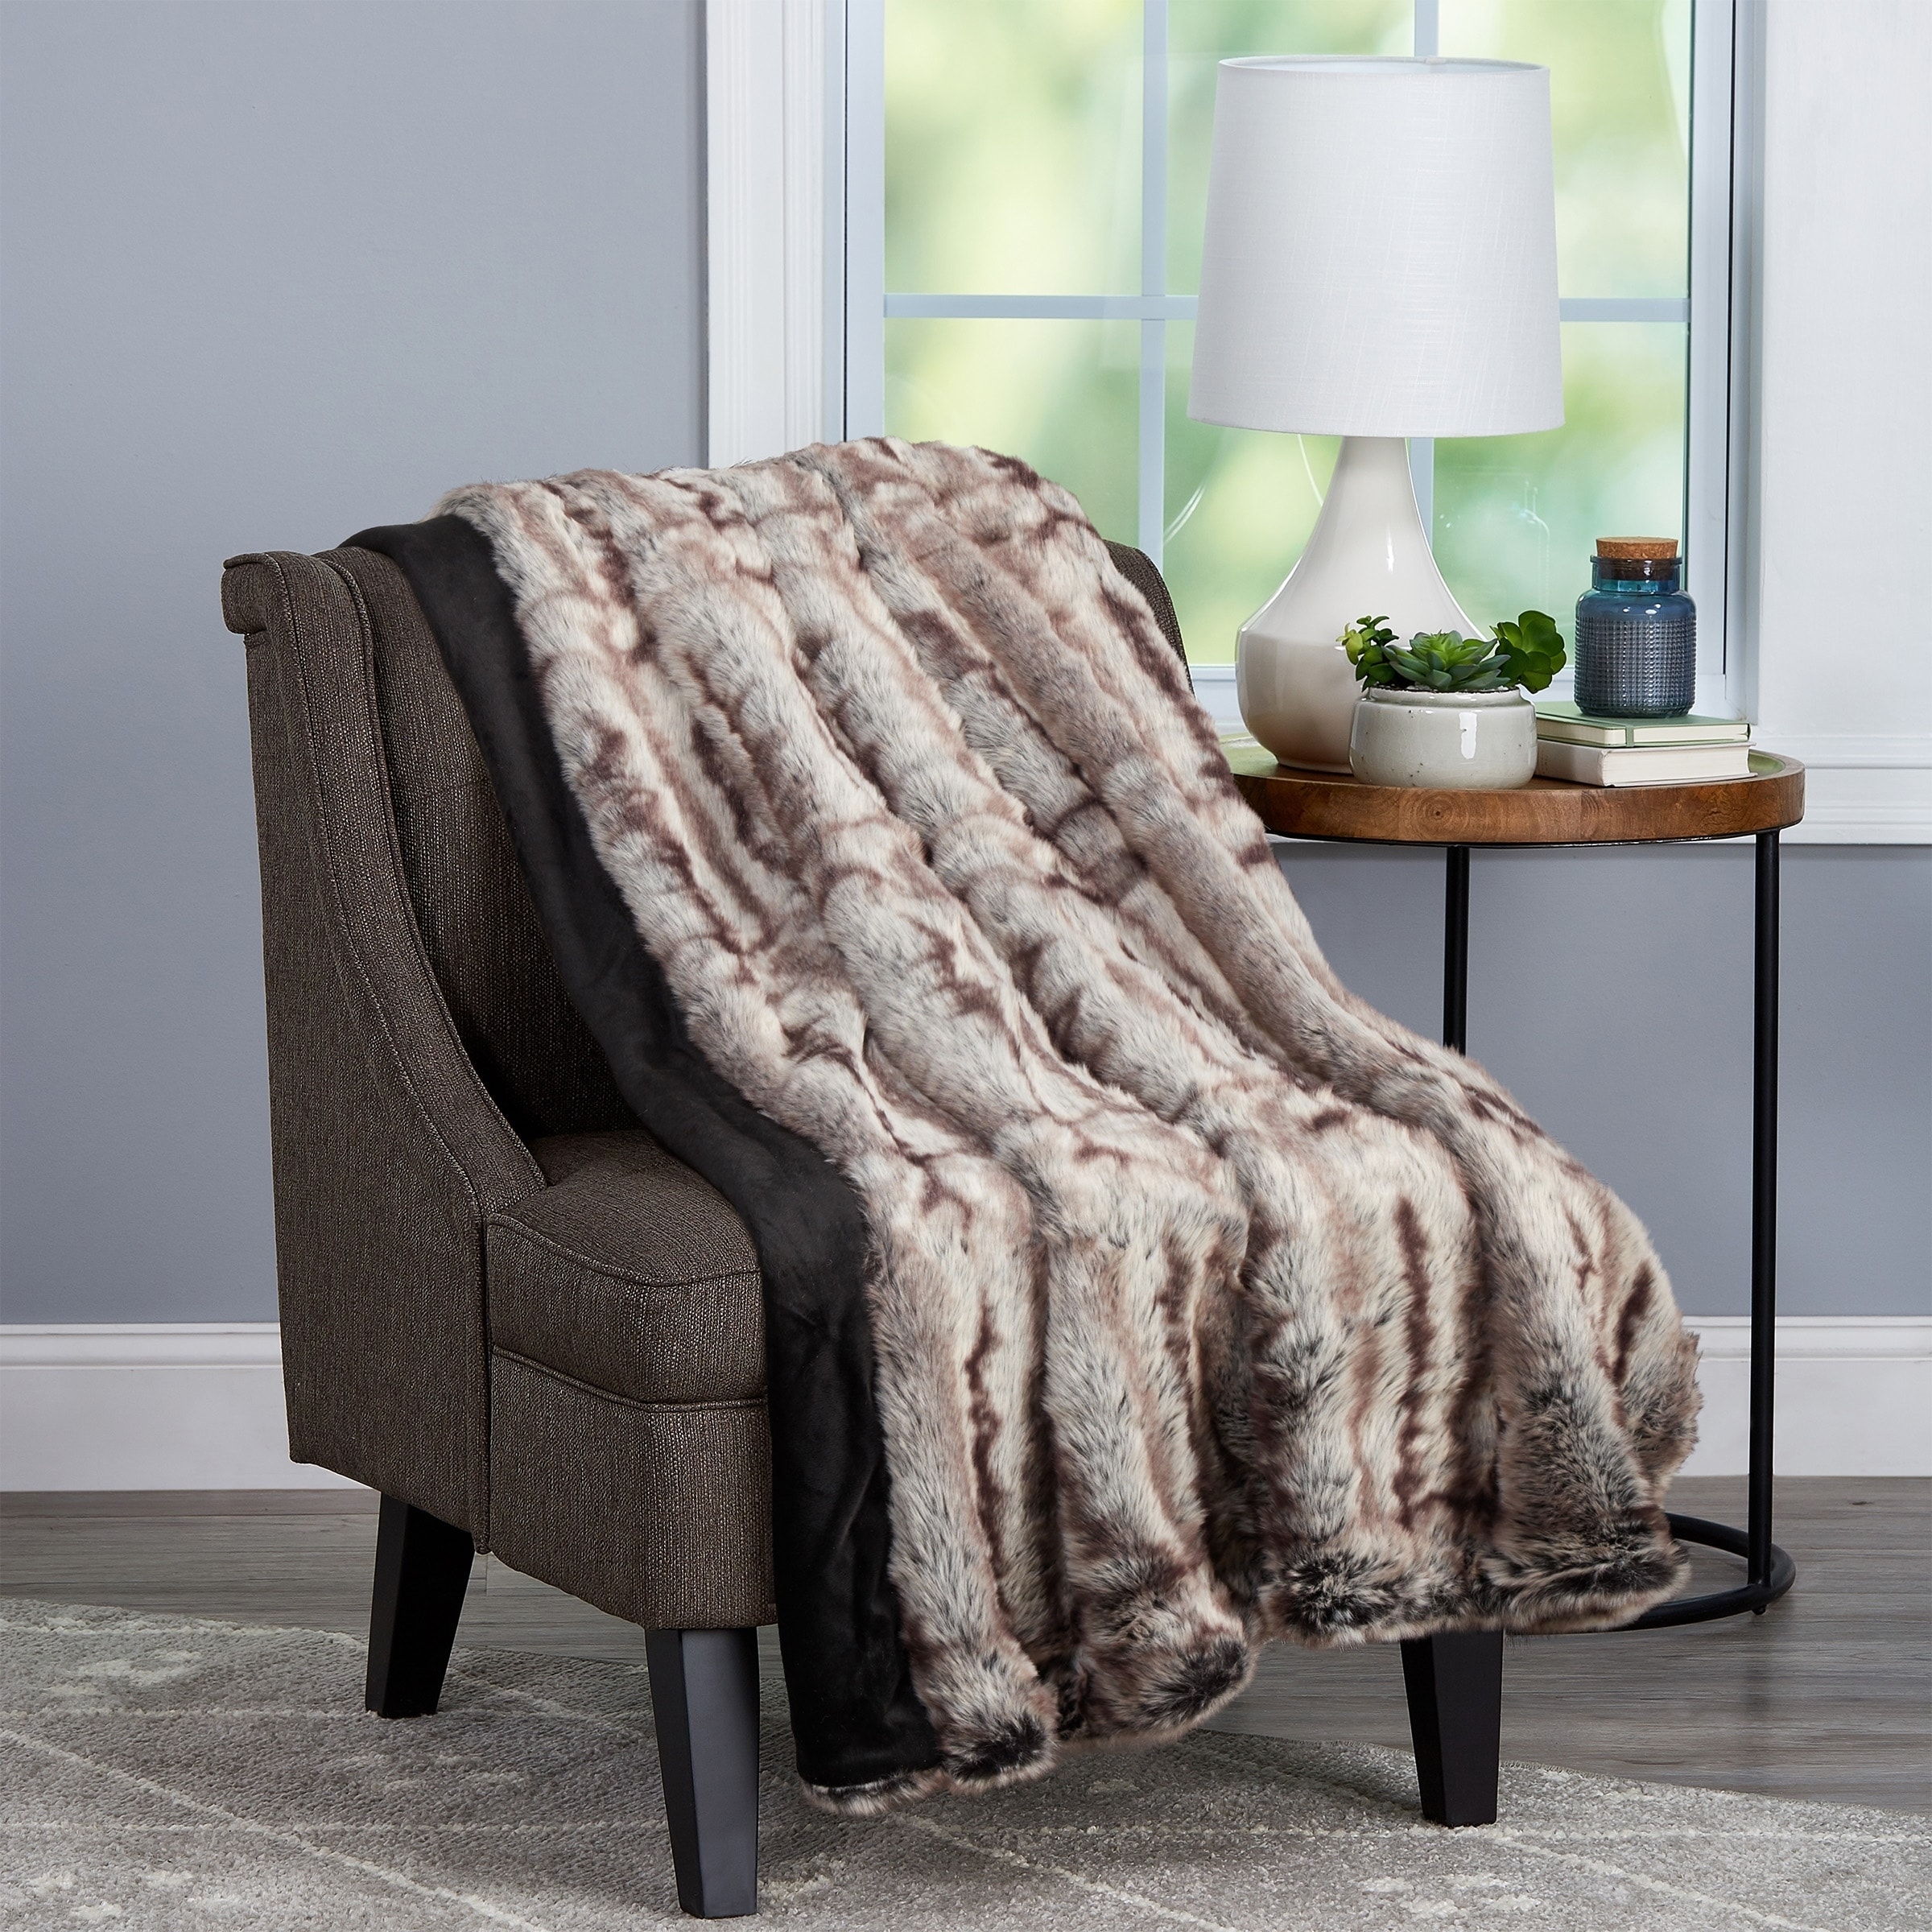 https://ak1.ostkcdn.com/images/products/27146606/Faux-Fur-Throw-Hypoallergenic-Faux-Chinchilla-Fur-Blanket-with-Faux-Mink-Back-and-Gift-Box-60x70-By-Windsor-Home-Striped-a6ecf845-8068-4e7f-bbe2-05018ead83c1.jpg